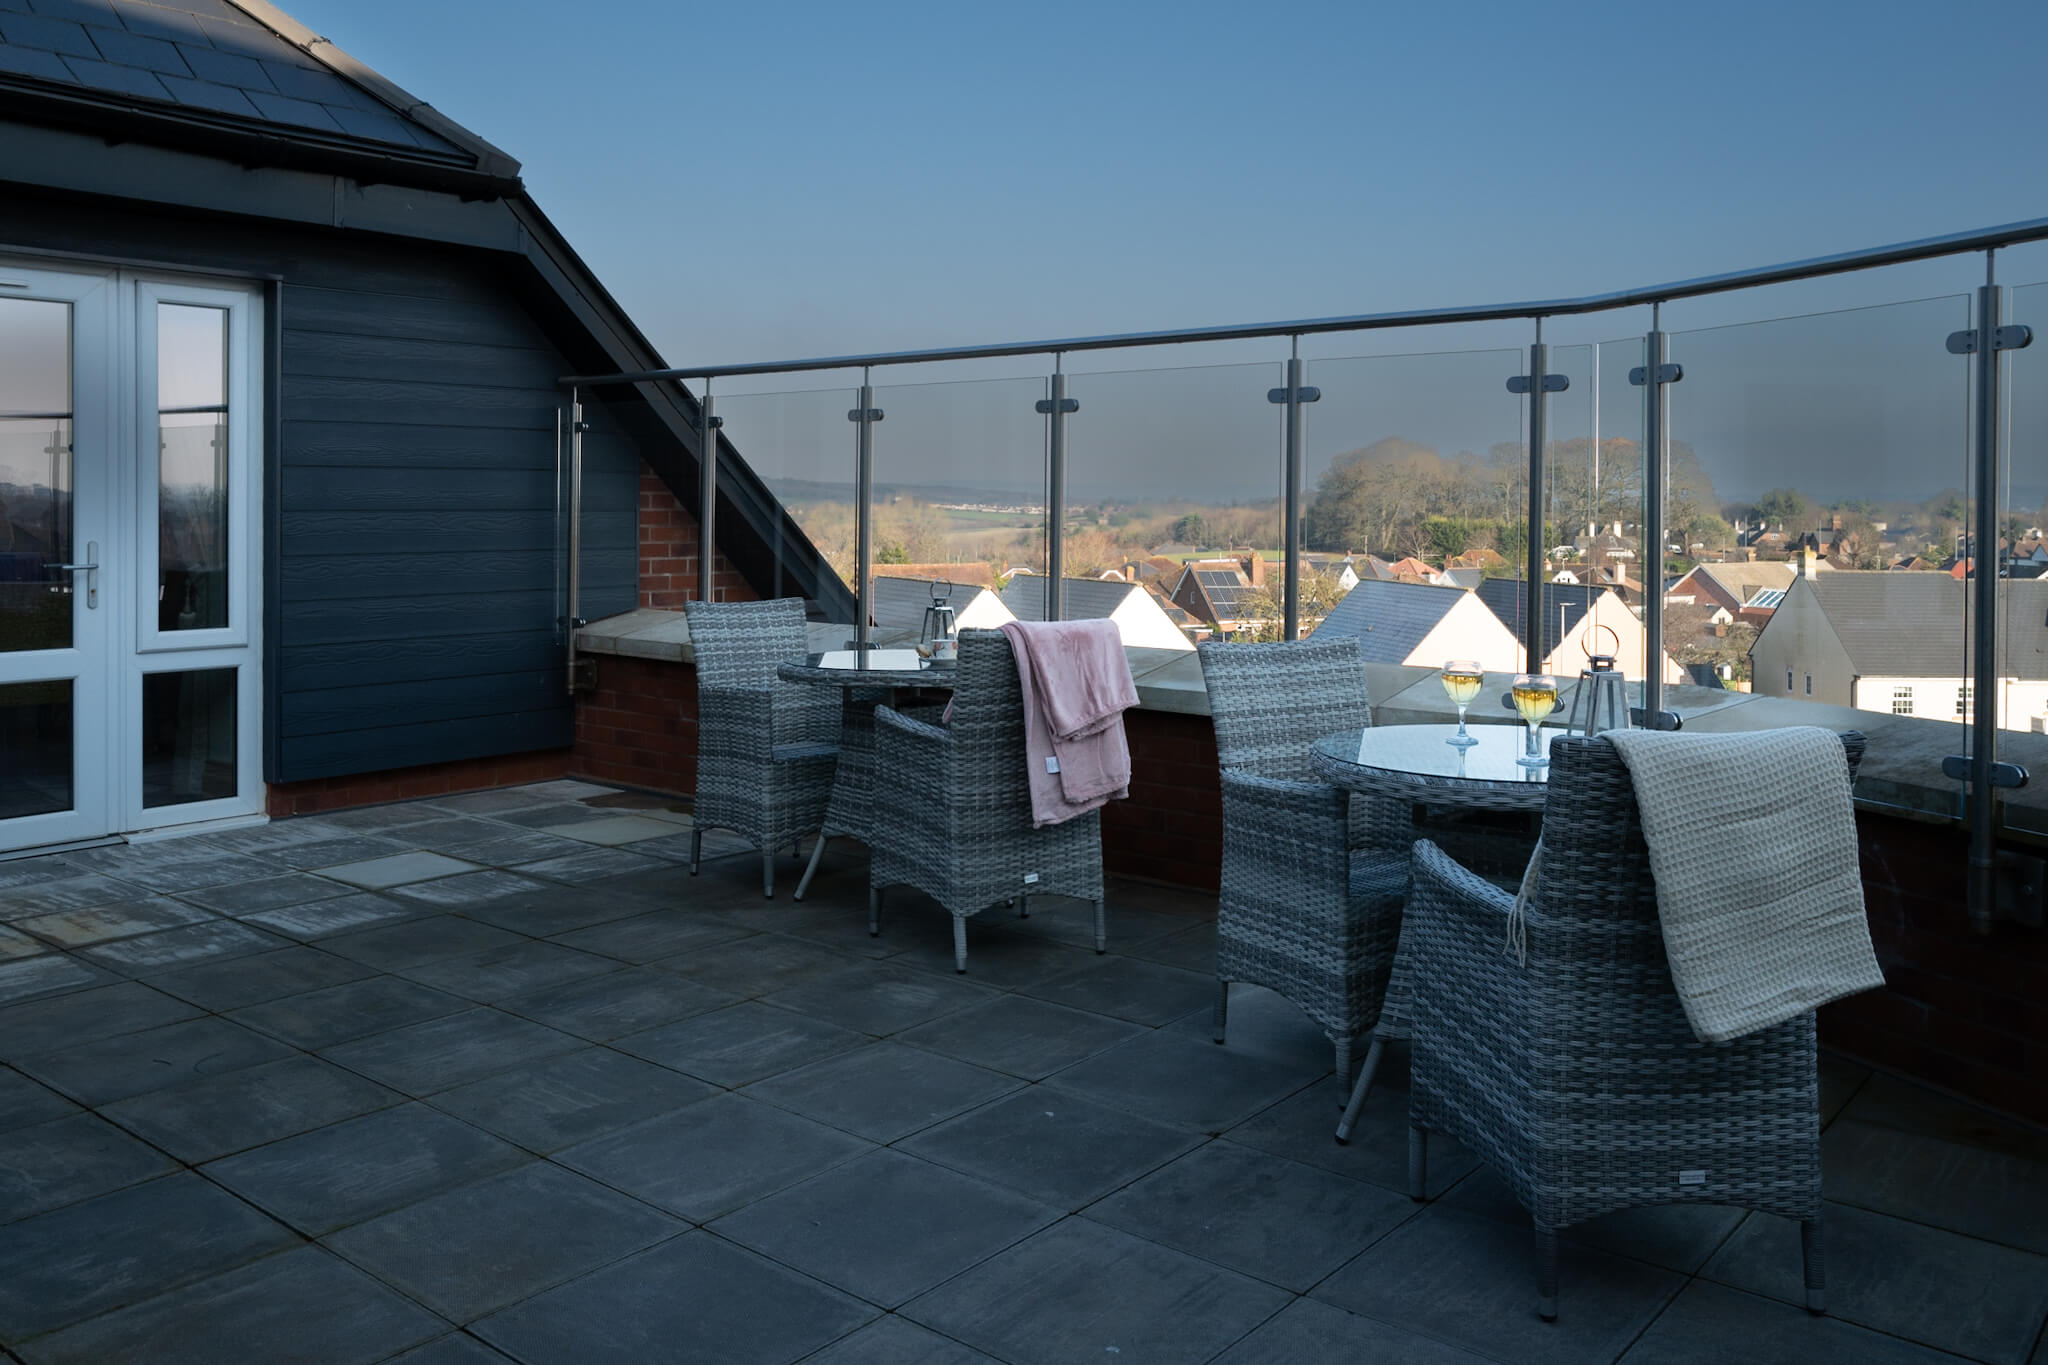 Roof terrace with two sets of garden dining tables. Blankets on back of chairs. Glass fencing. Two wine glasses.